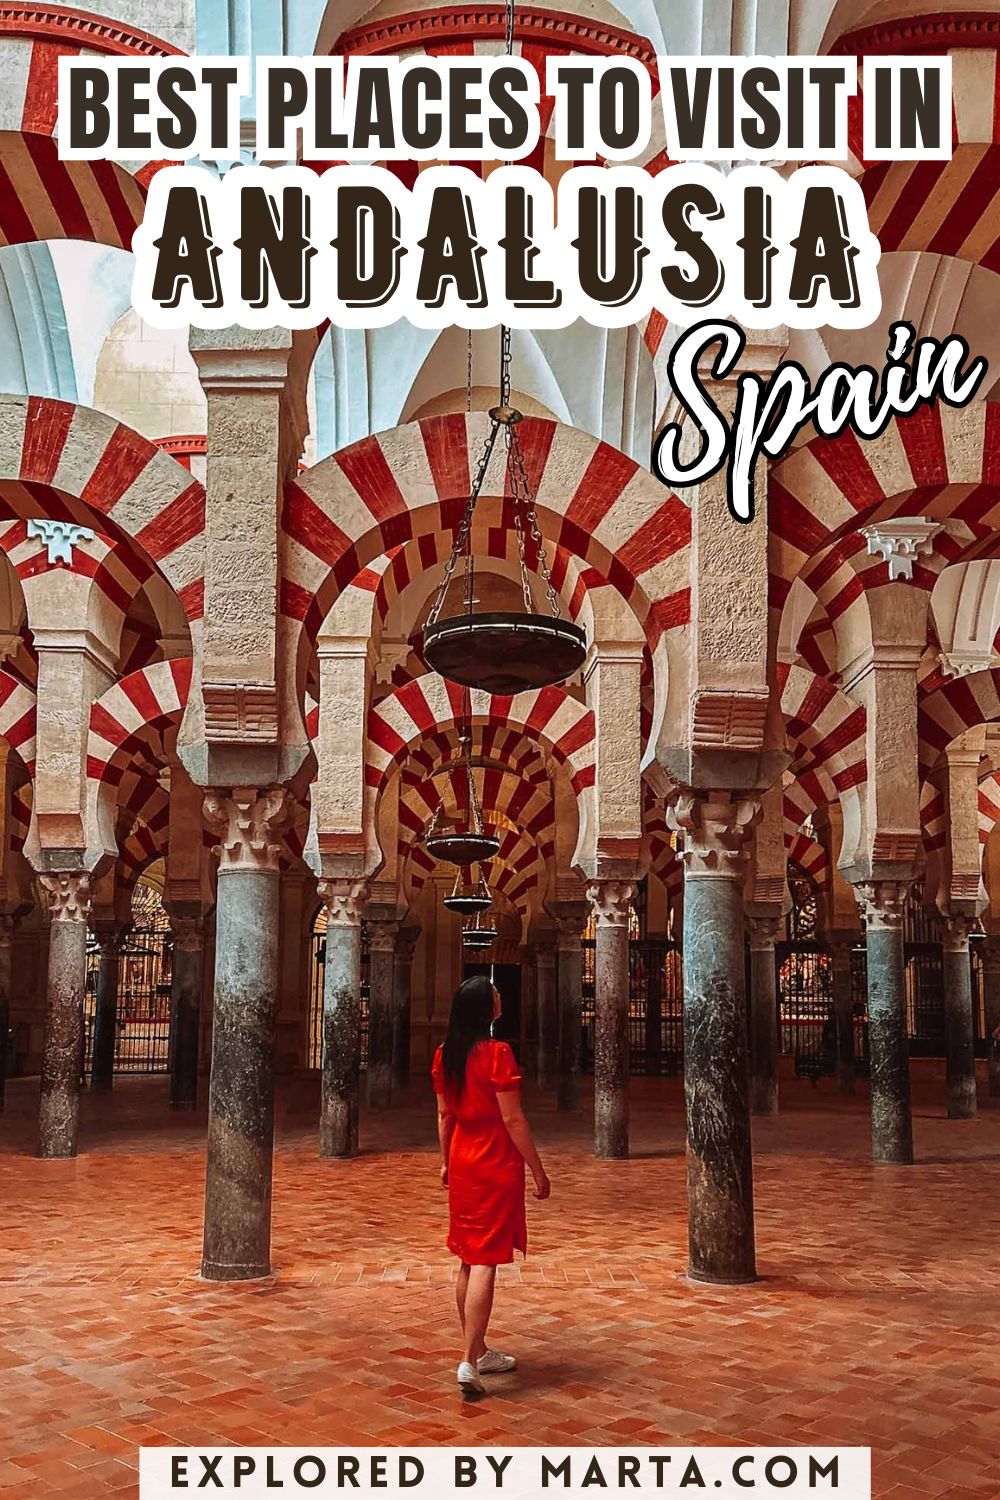 All the best places to visit in Andalusia, Spain